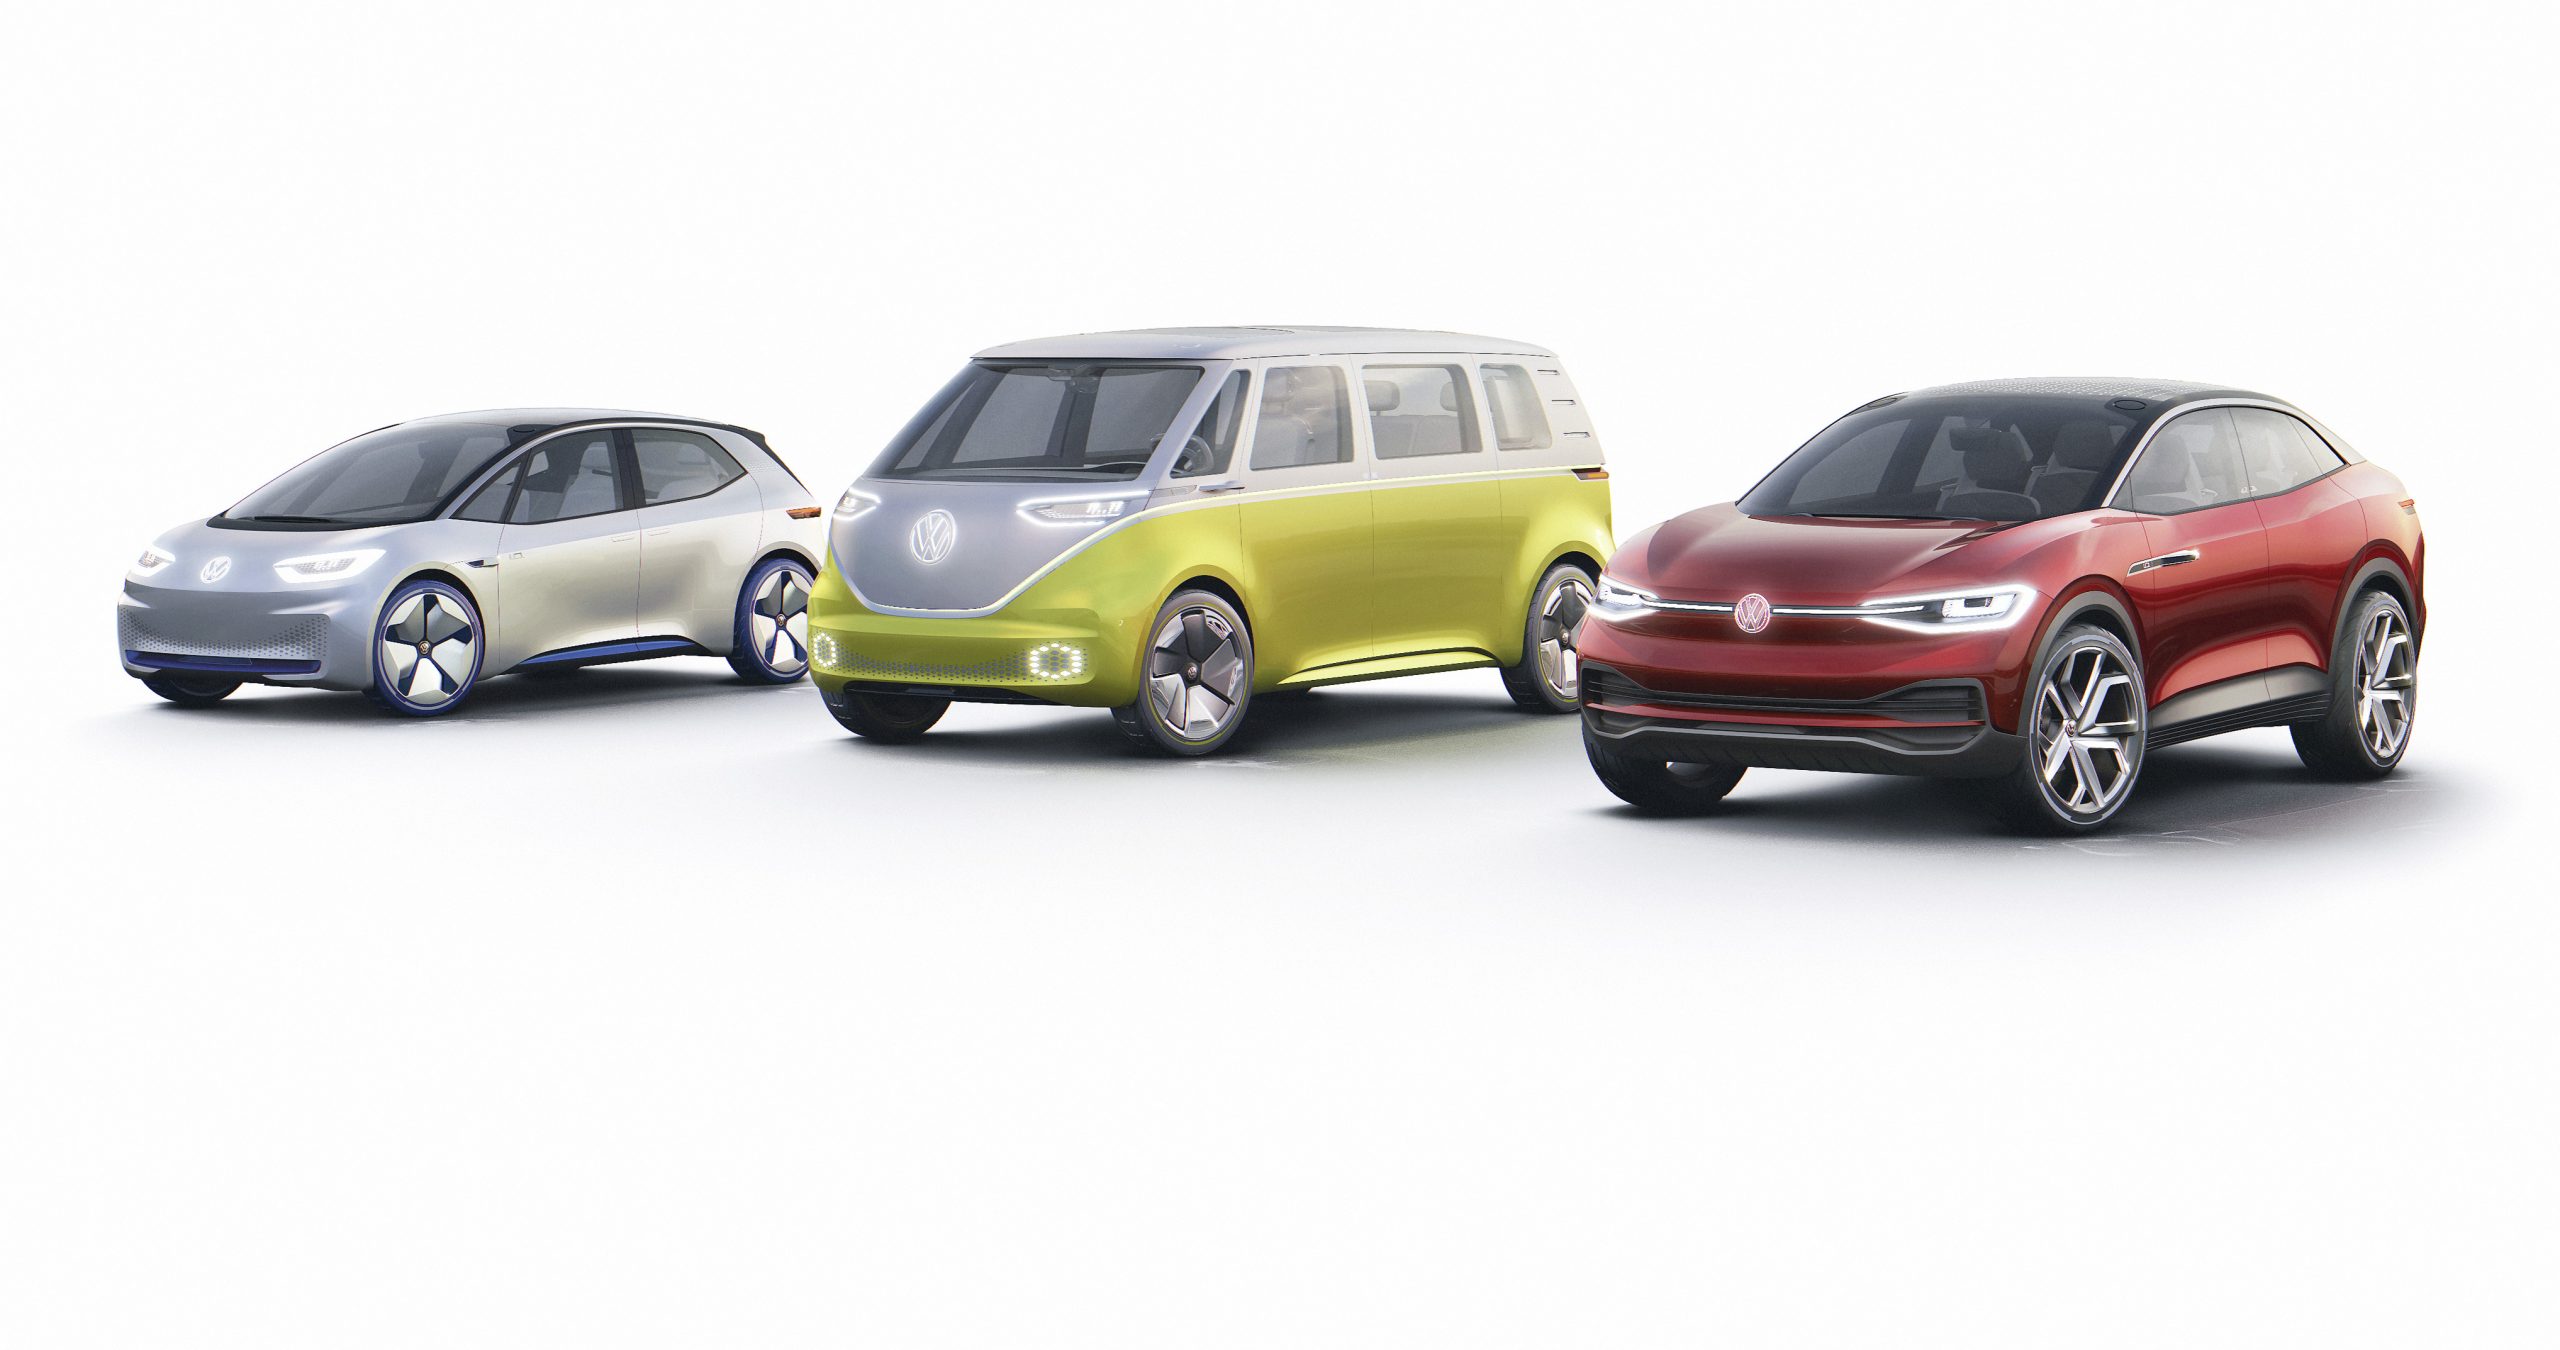 70 years of VW in the U.S.